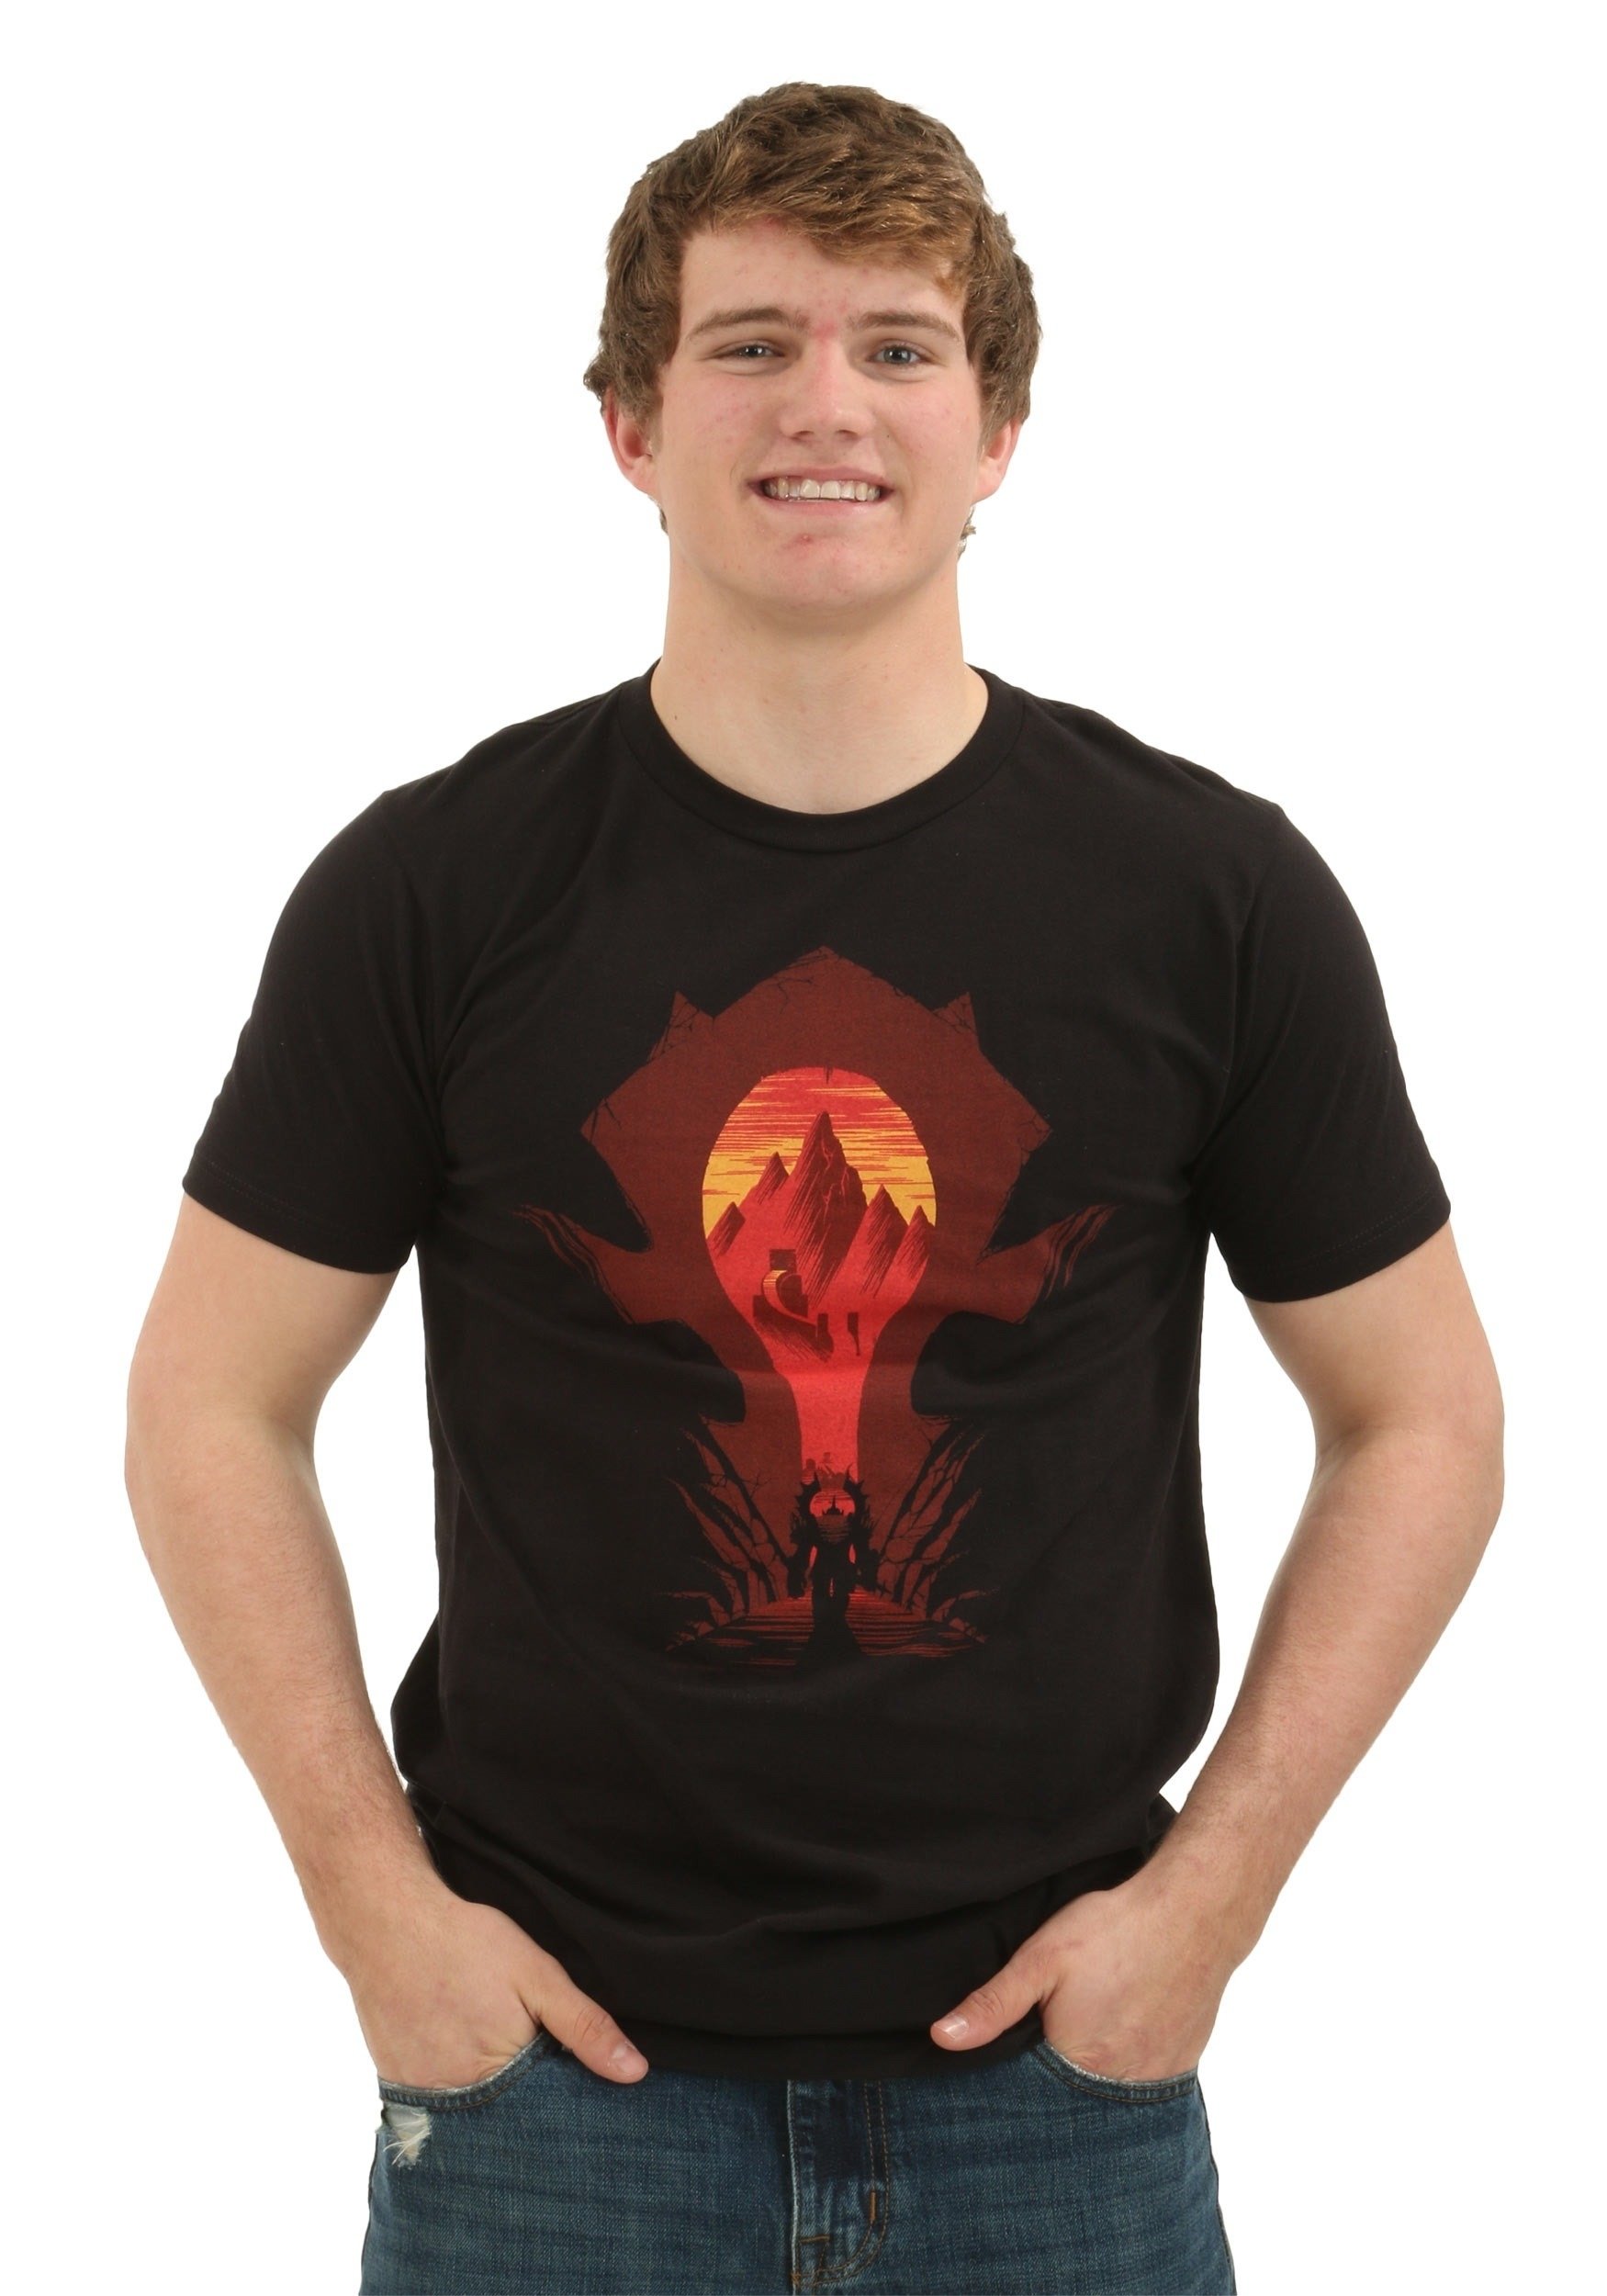 10 Unique World Of Warcraft Gift Ideas mens world of warcraft horde silhouette t shirt 2022